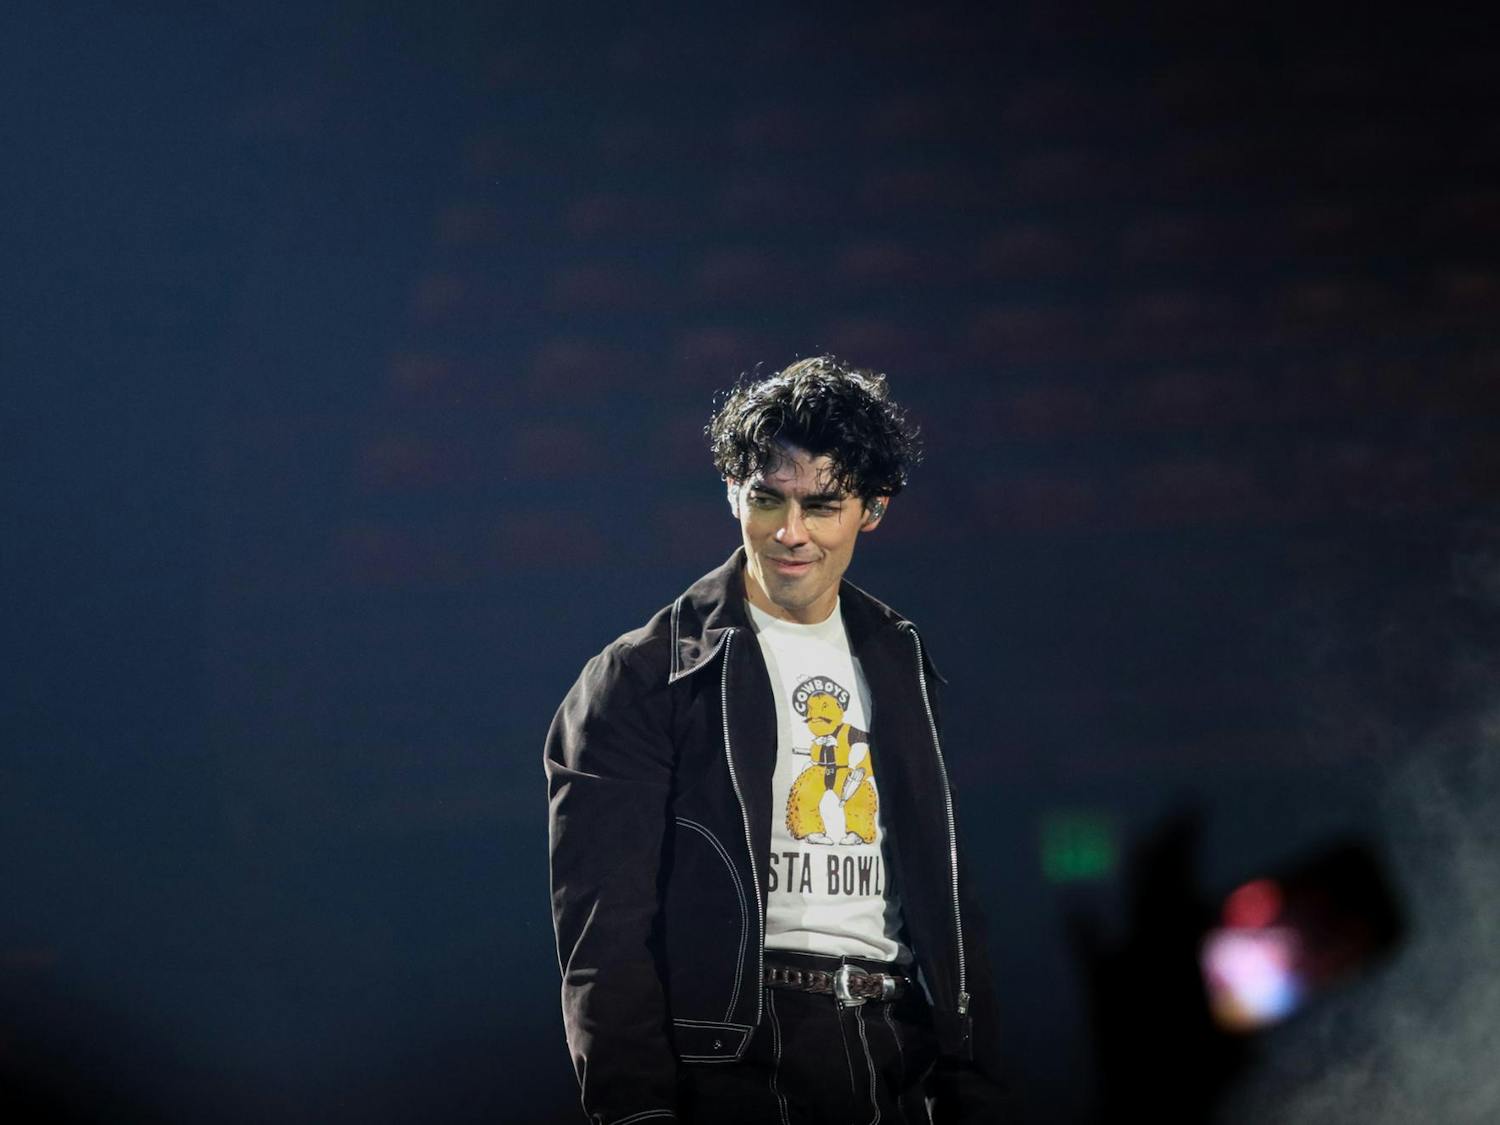 Joe Jonas smiles during the Jonas Brothers performance at Colonial Life Arena on Oct. 10, 2023. The Tour currently has shows scheduled in the U.S., Europe and Australia.